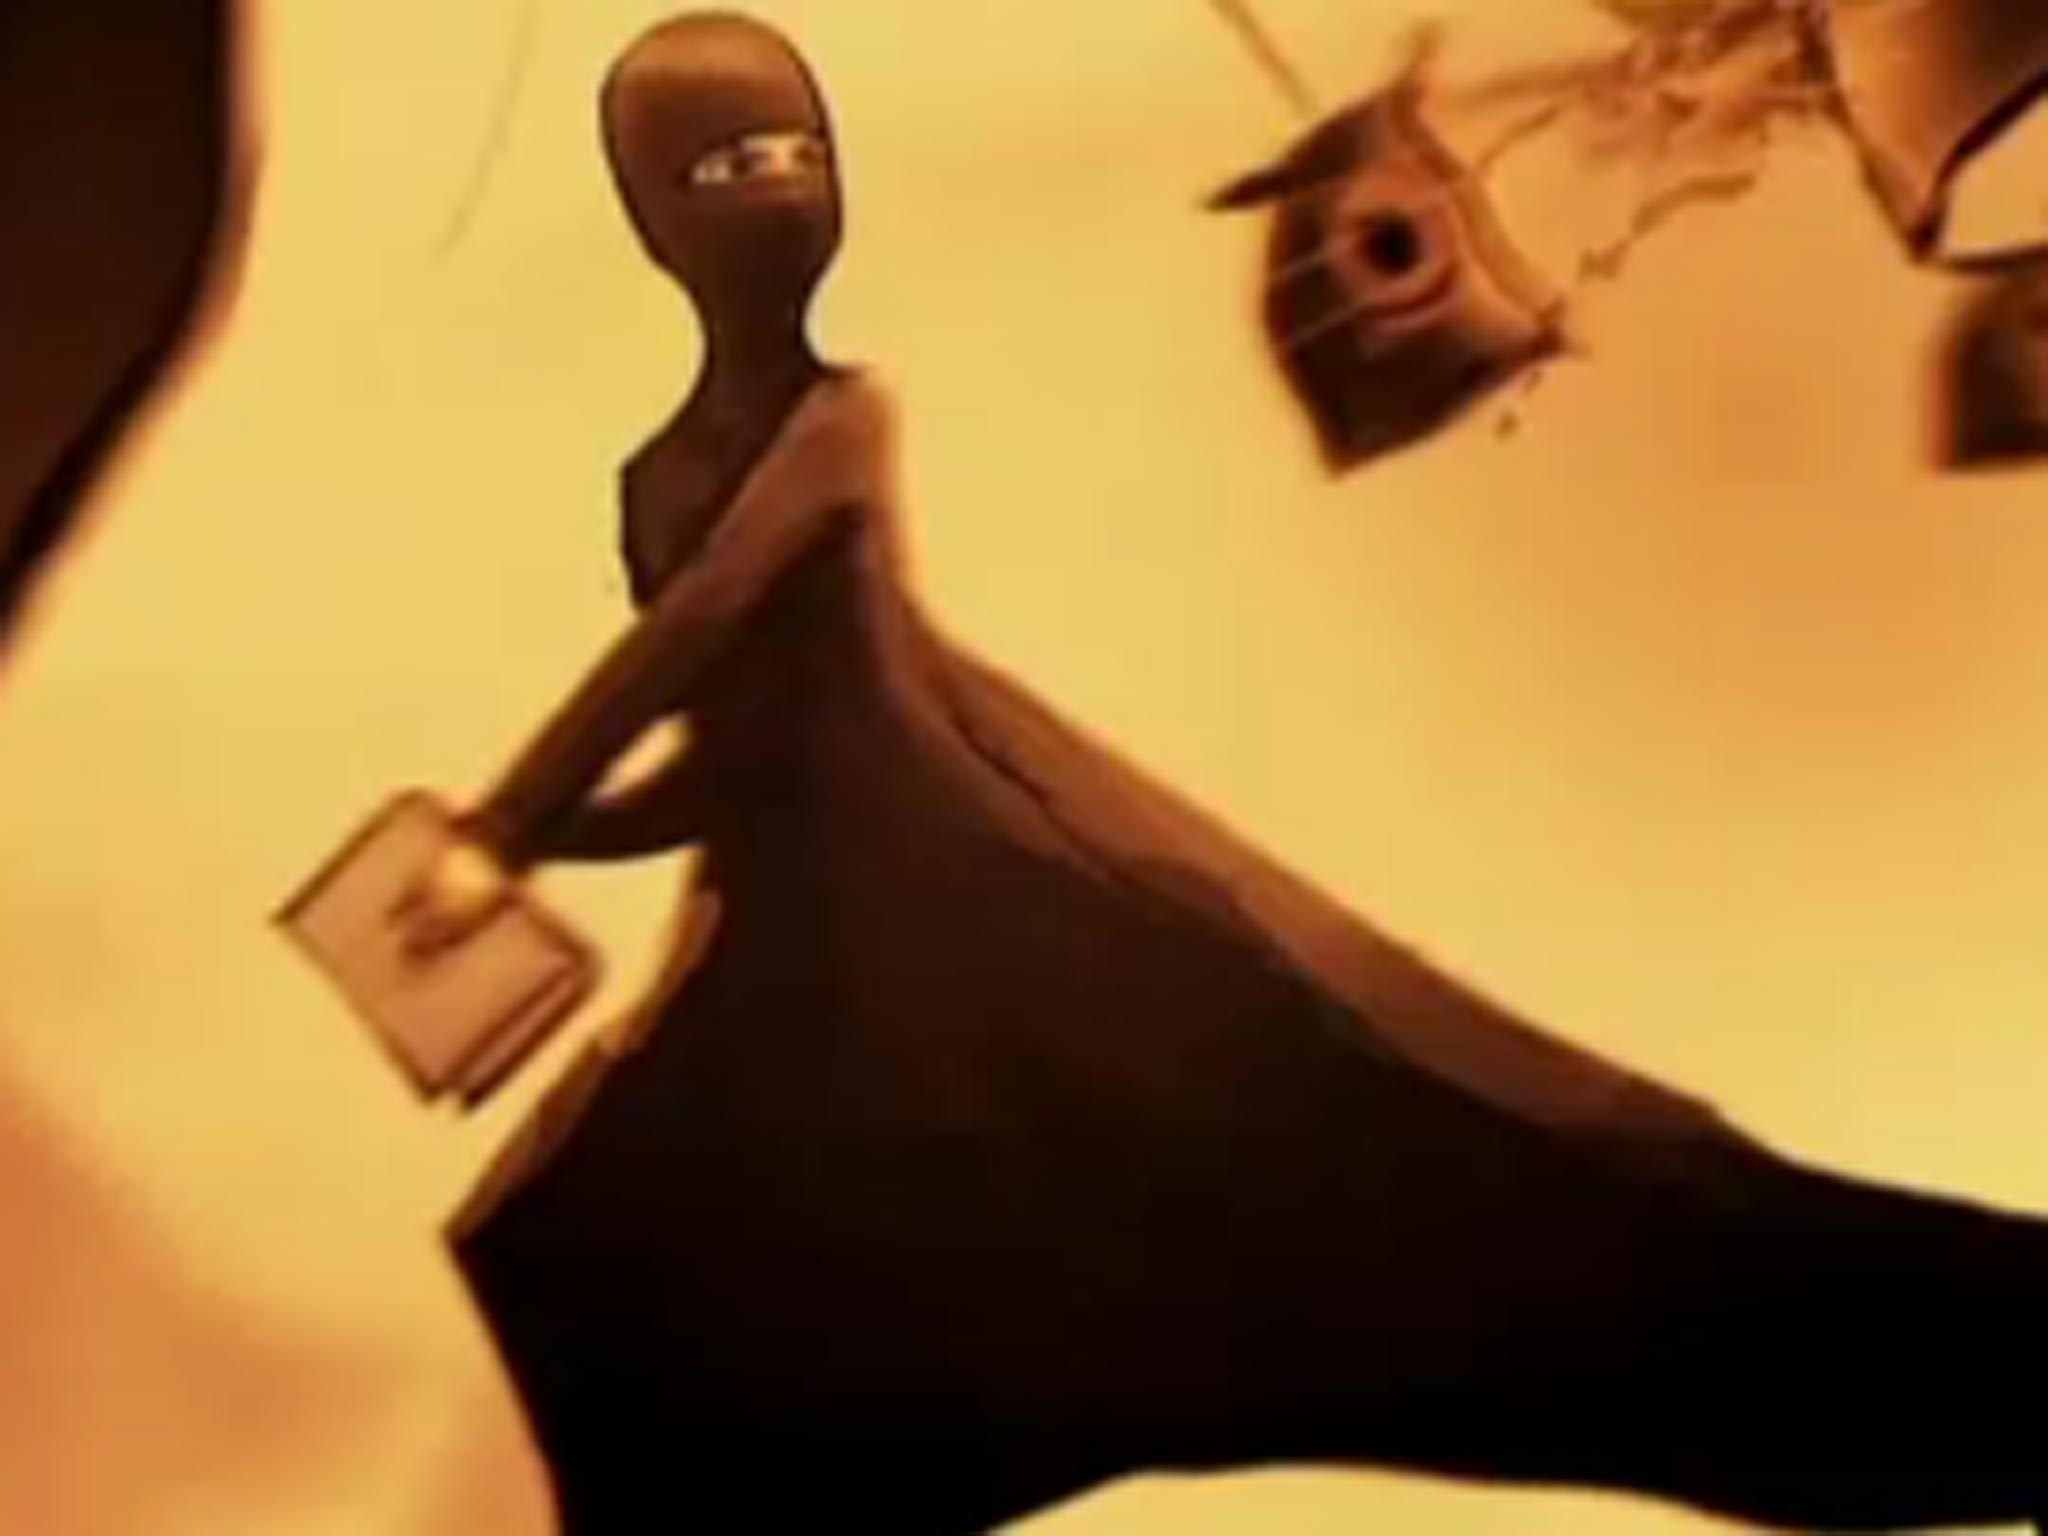 Pakistani Burqa Wali Sex - Video: Burka Avenger becomes hit in Pakistan | The Independent